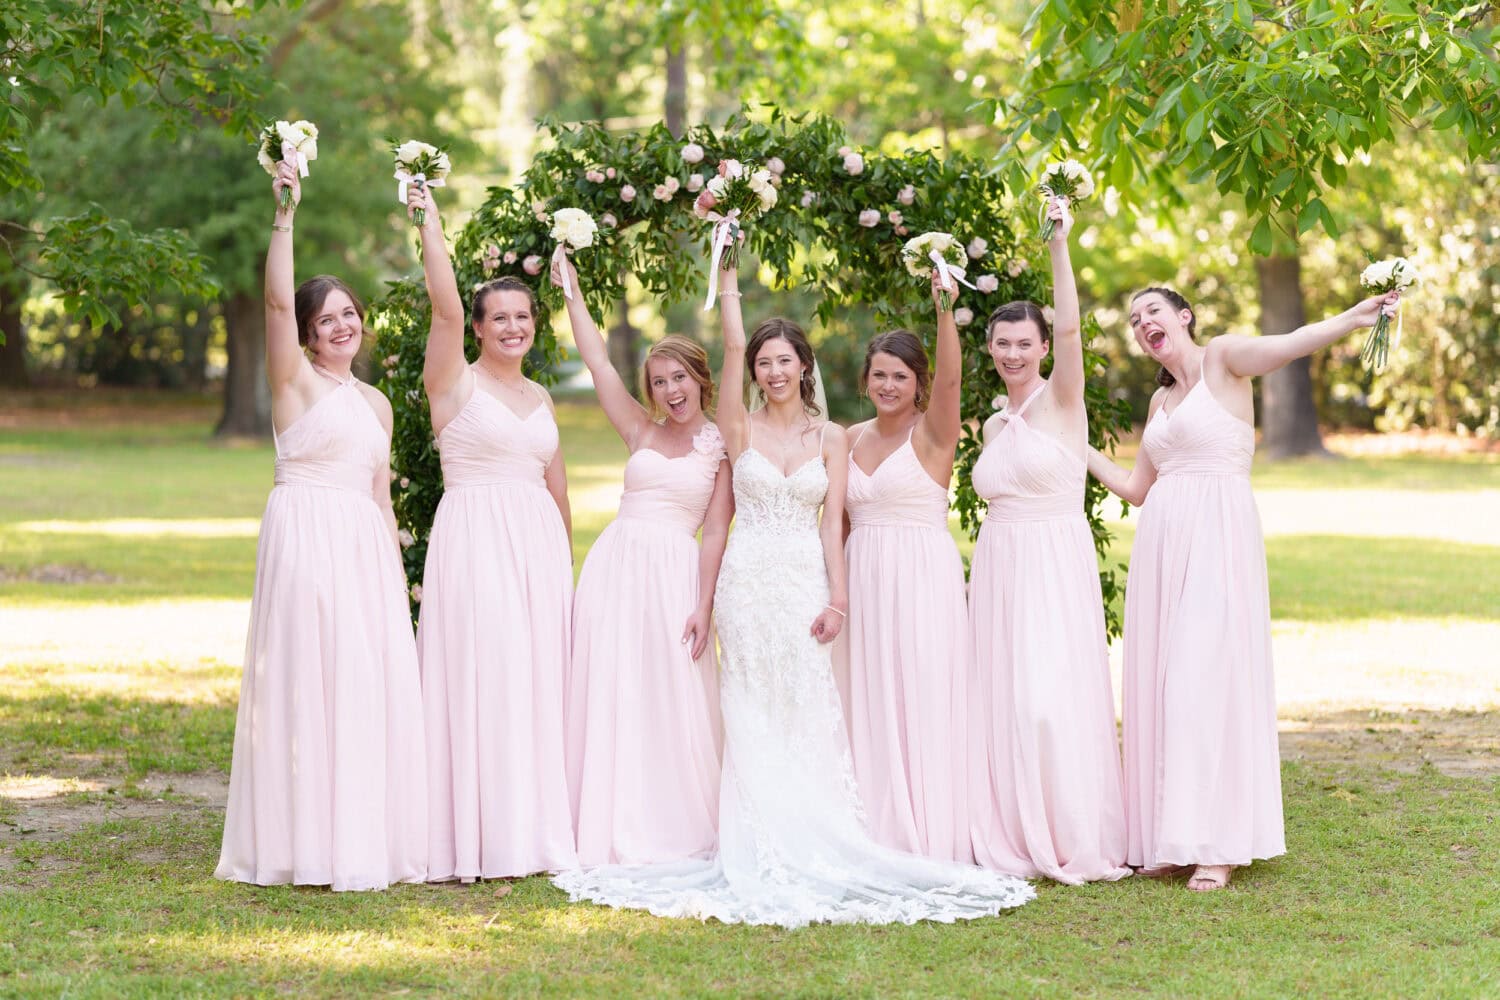 Bridesmaids holding flowers in the air - Tanglewood Plantation